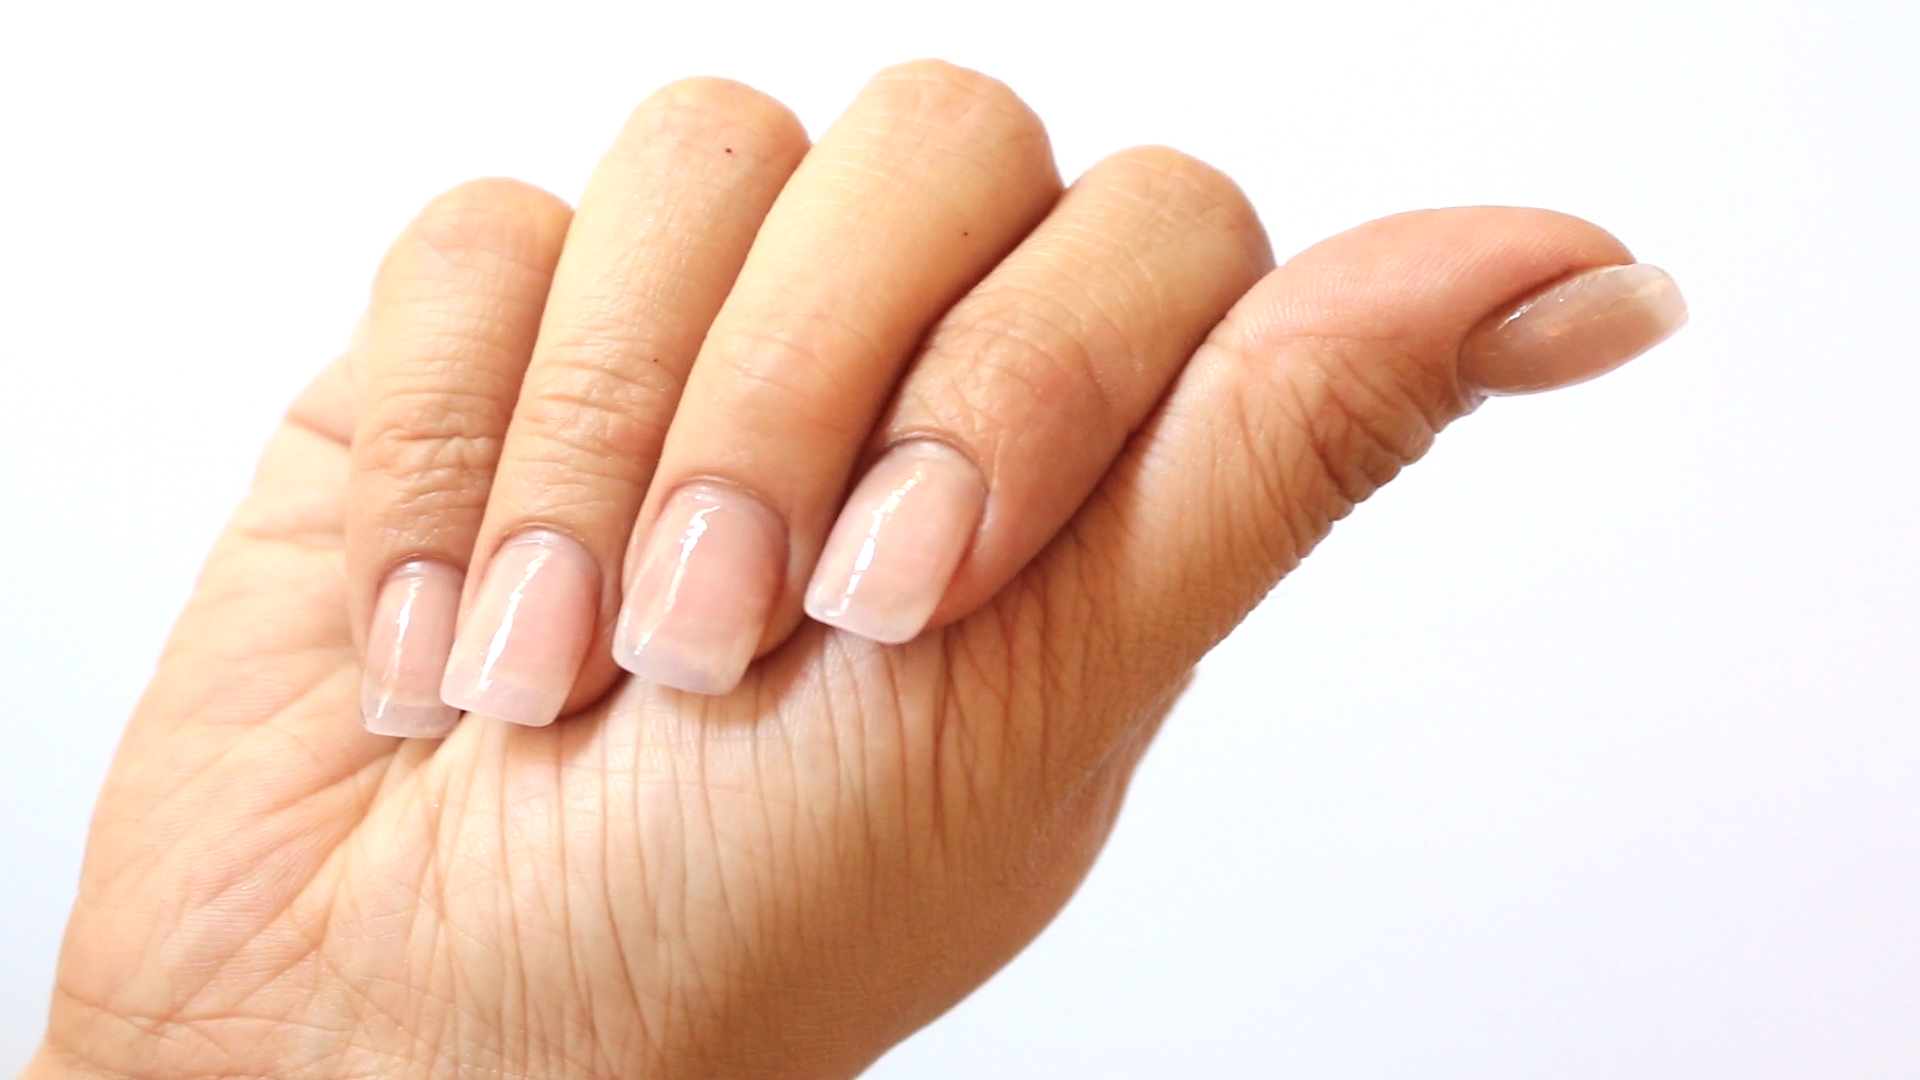 nail care and tips from experts around the world